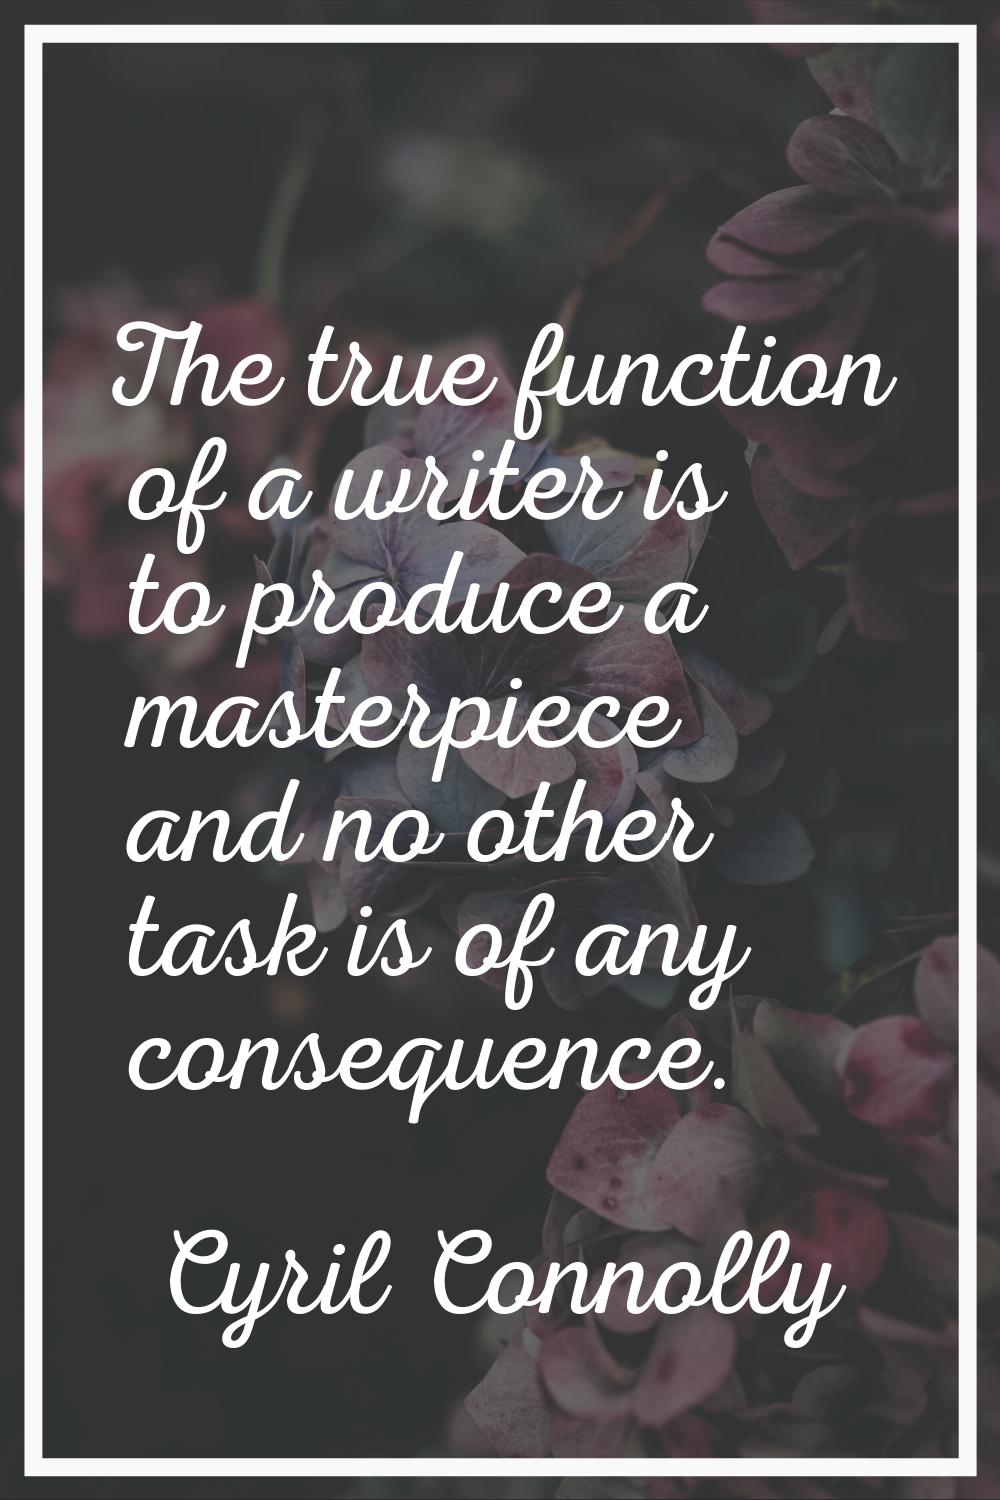 The true function of a writer is to produce a masterpiece and no other task is of any consequence.